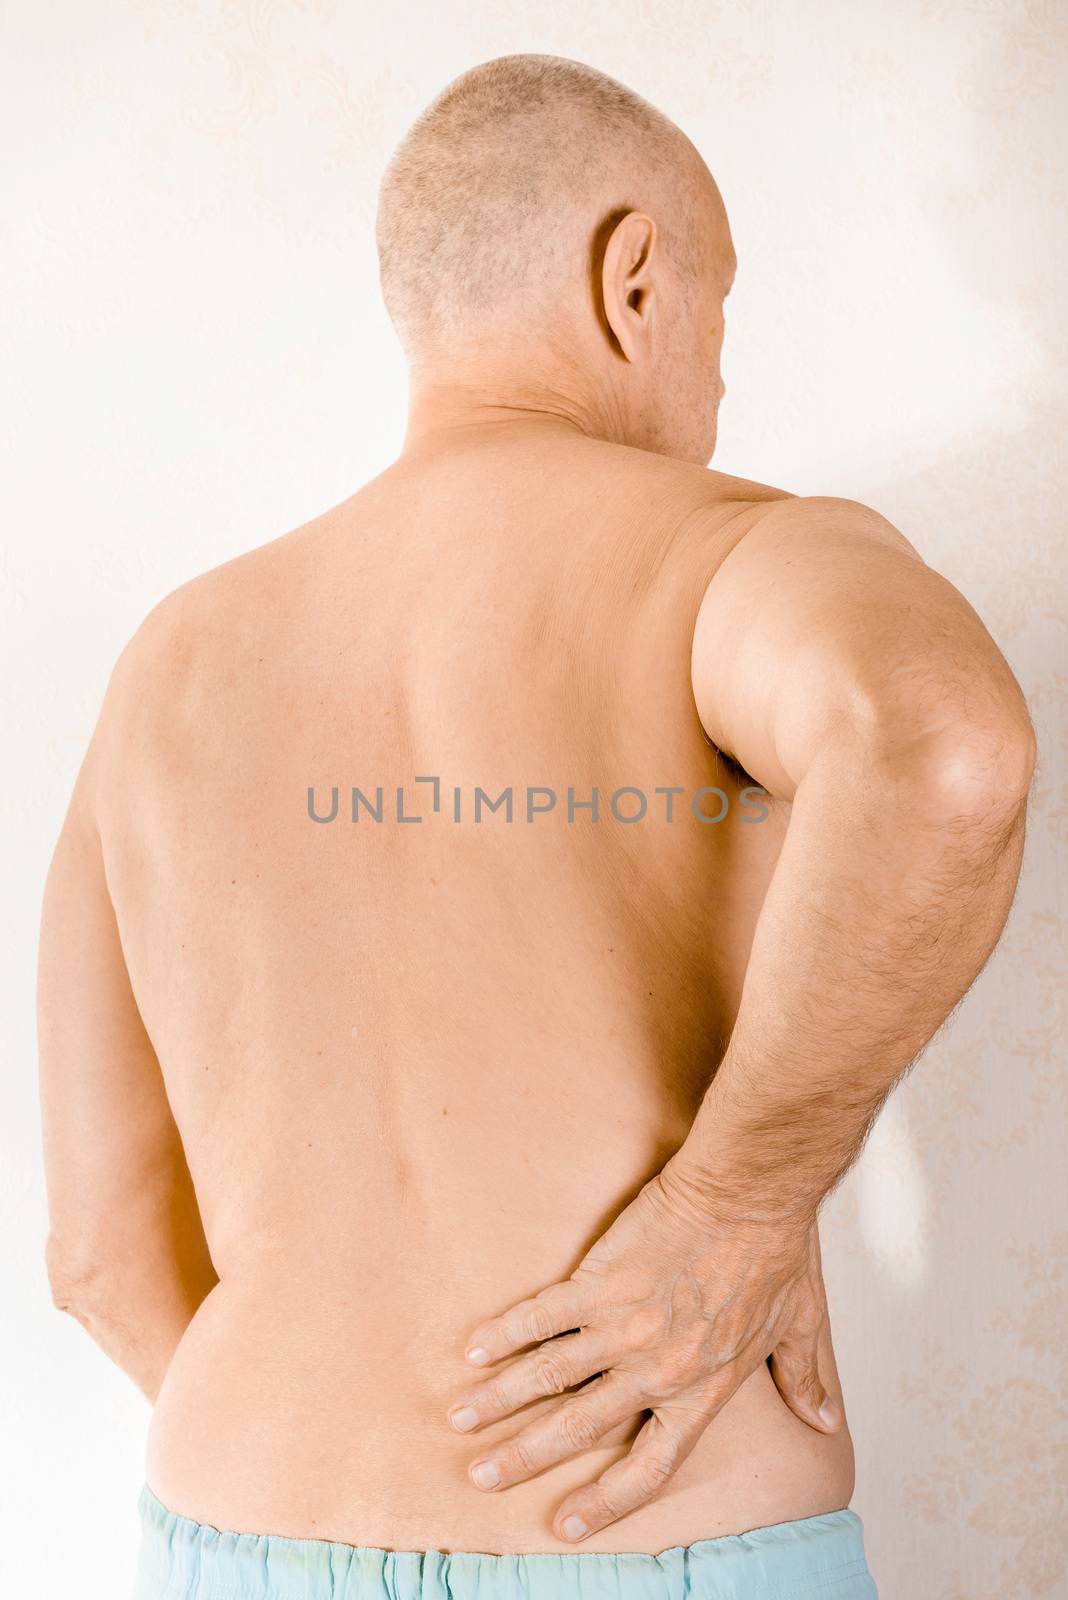 Man massaging the low back because of a painful lumbago due to a displacement of the lumbar vertebrae